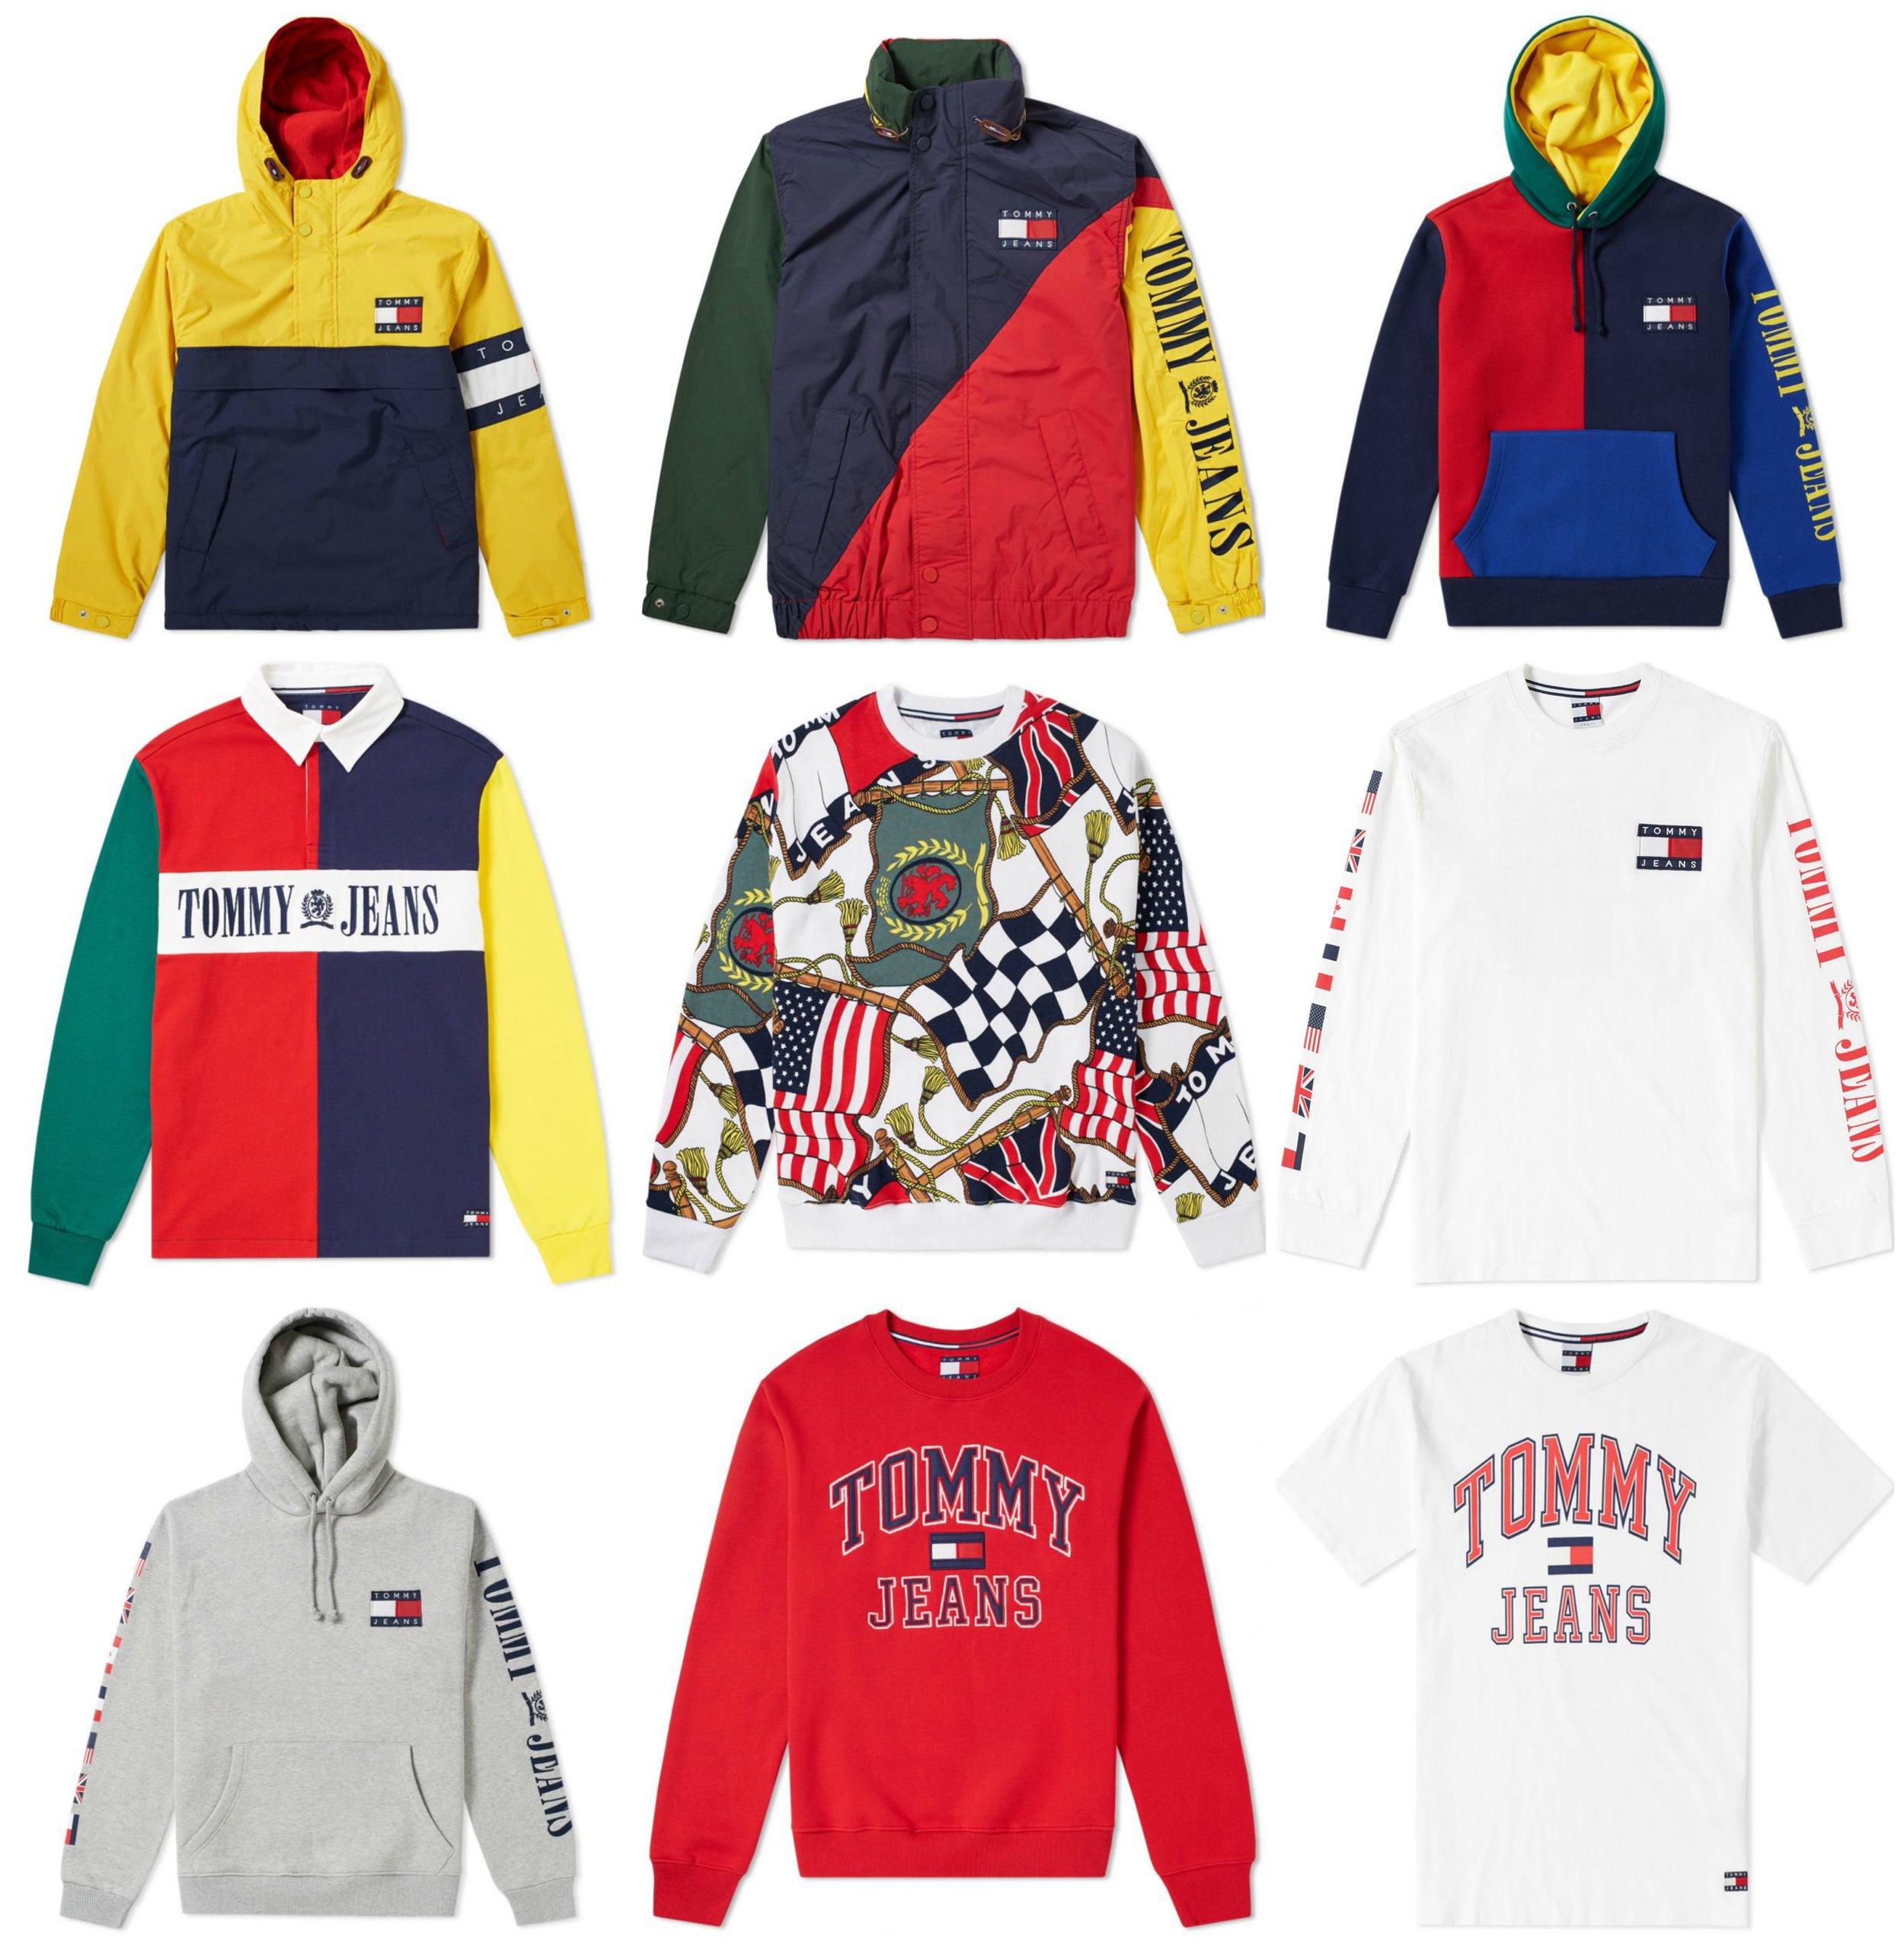 Now Available: Tommy Jeans 